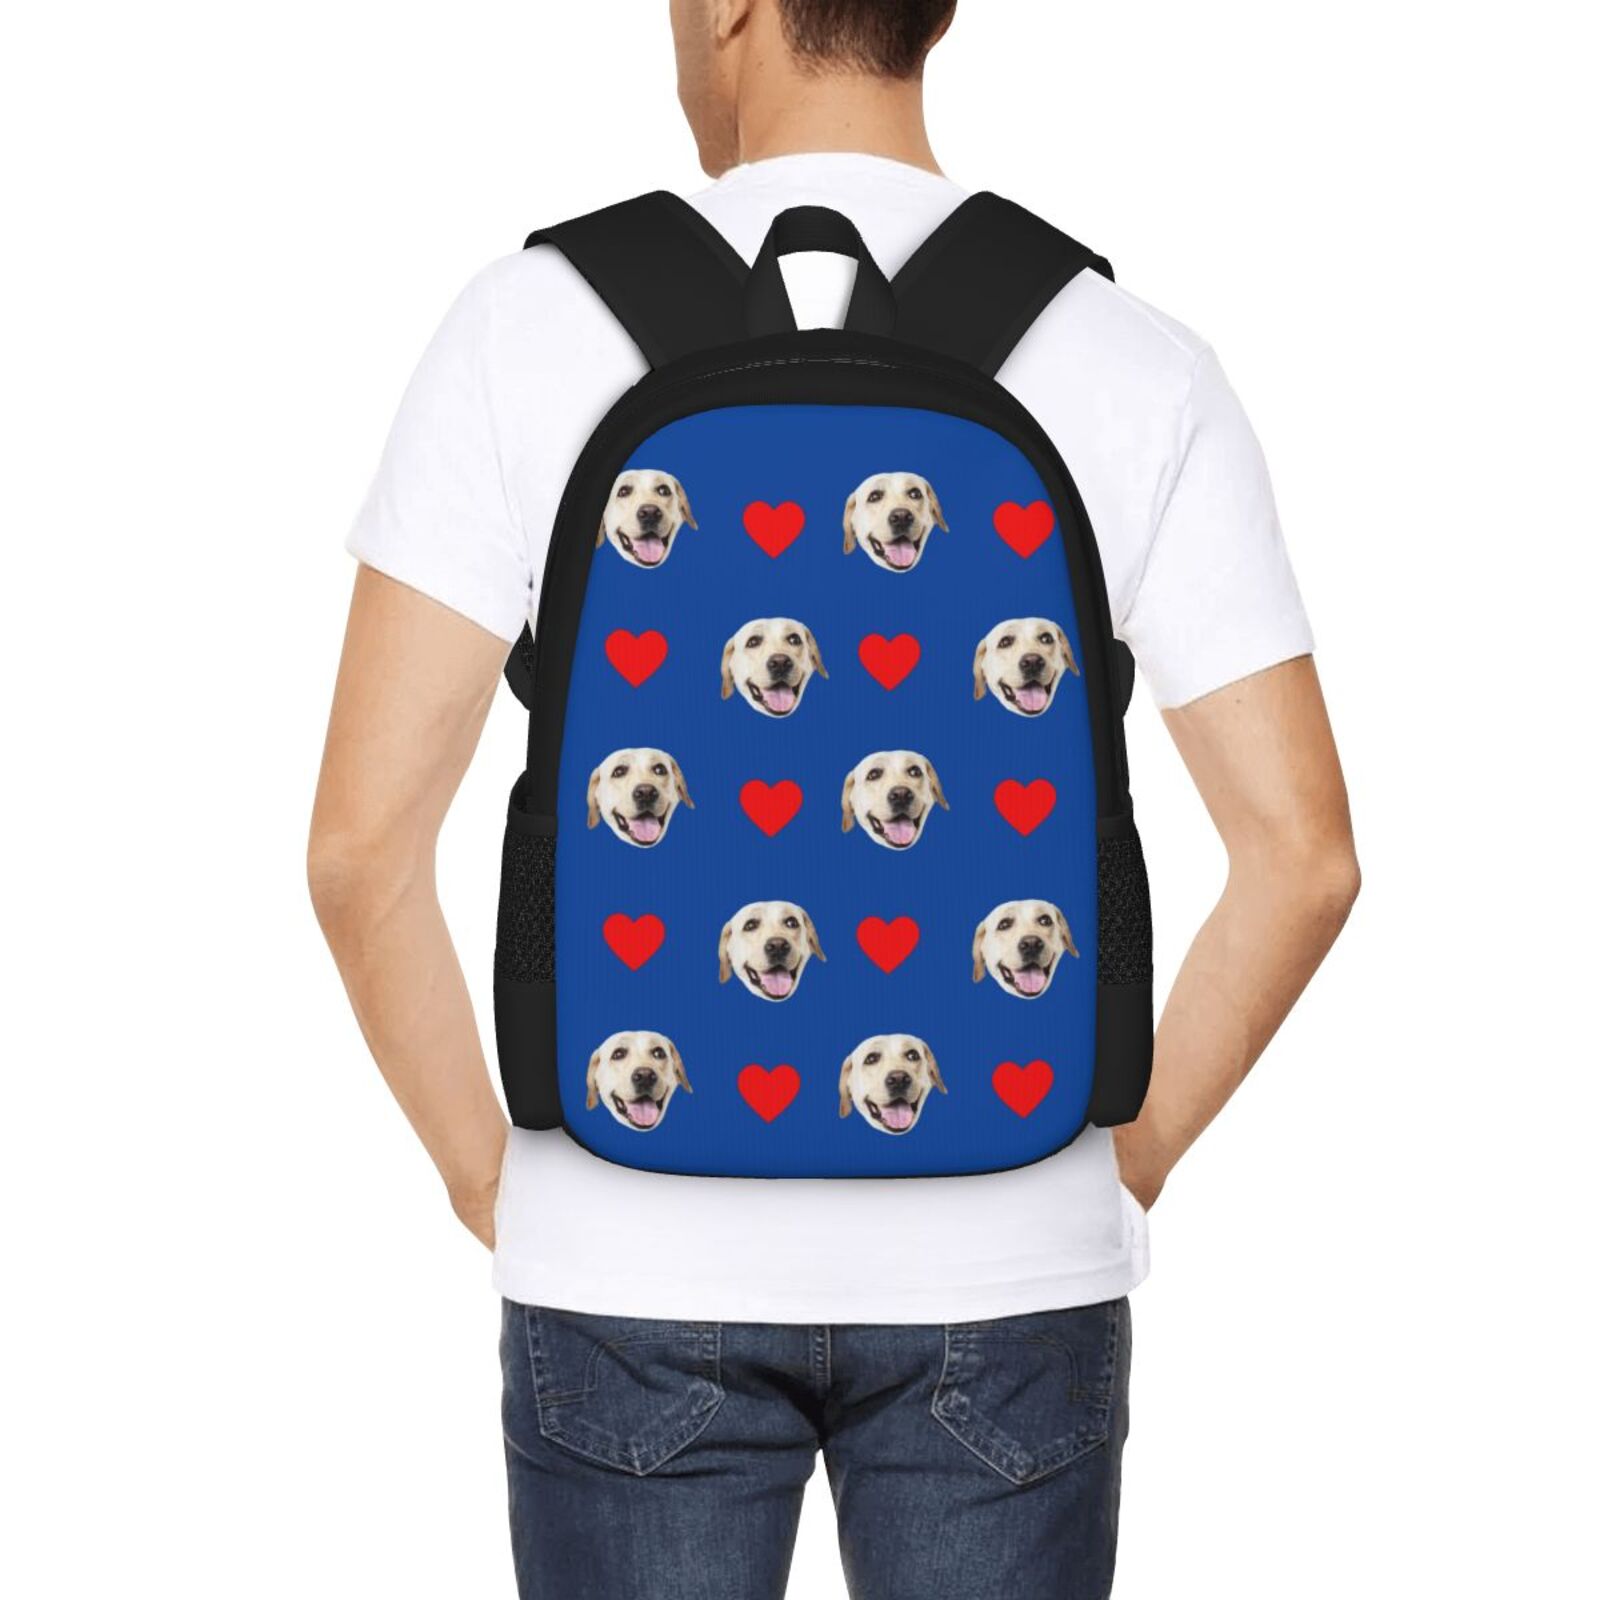 Custom Dog Face Backpack With Heart